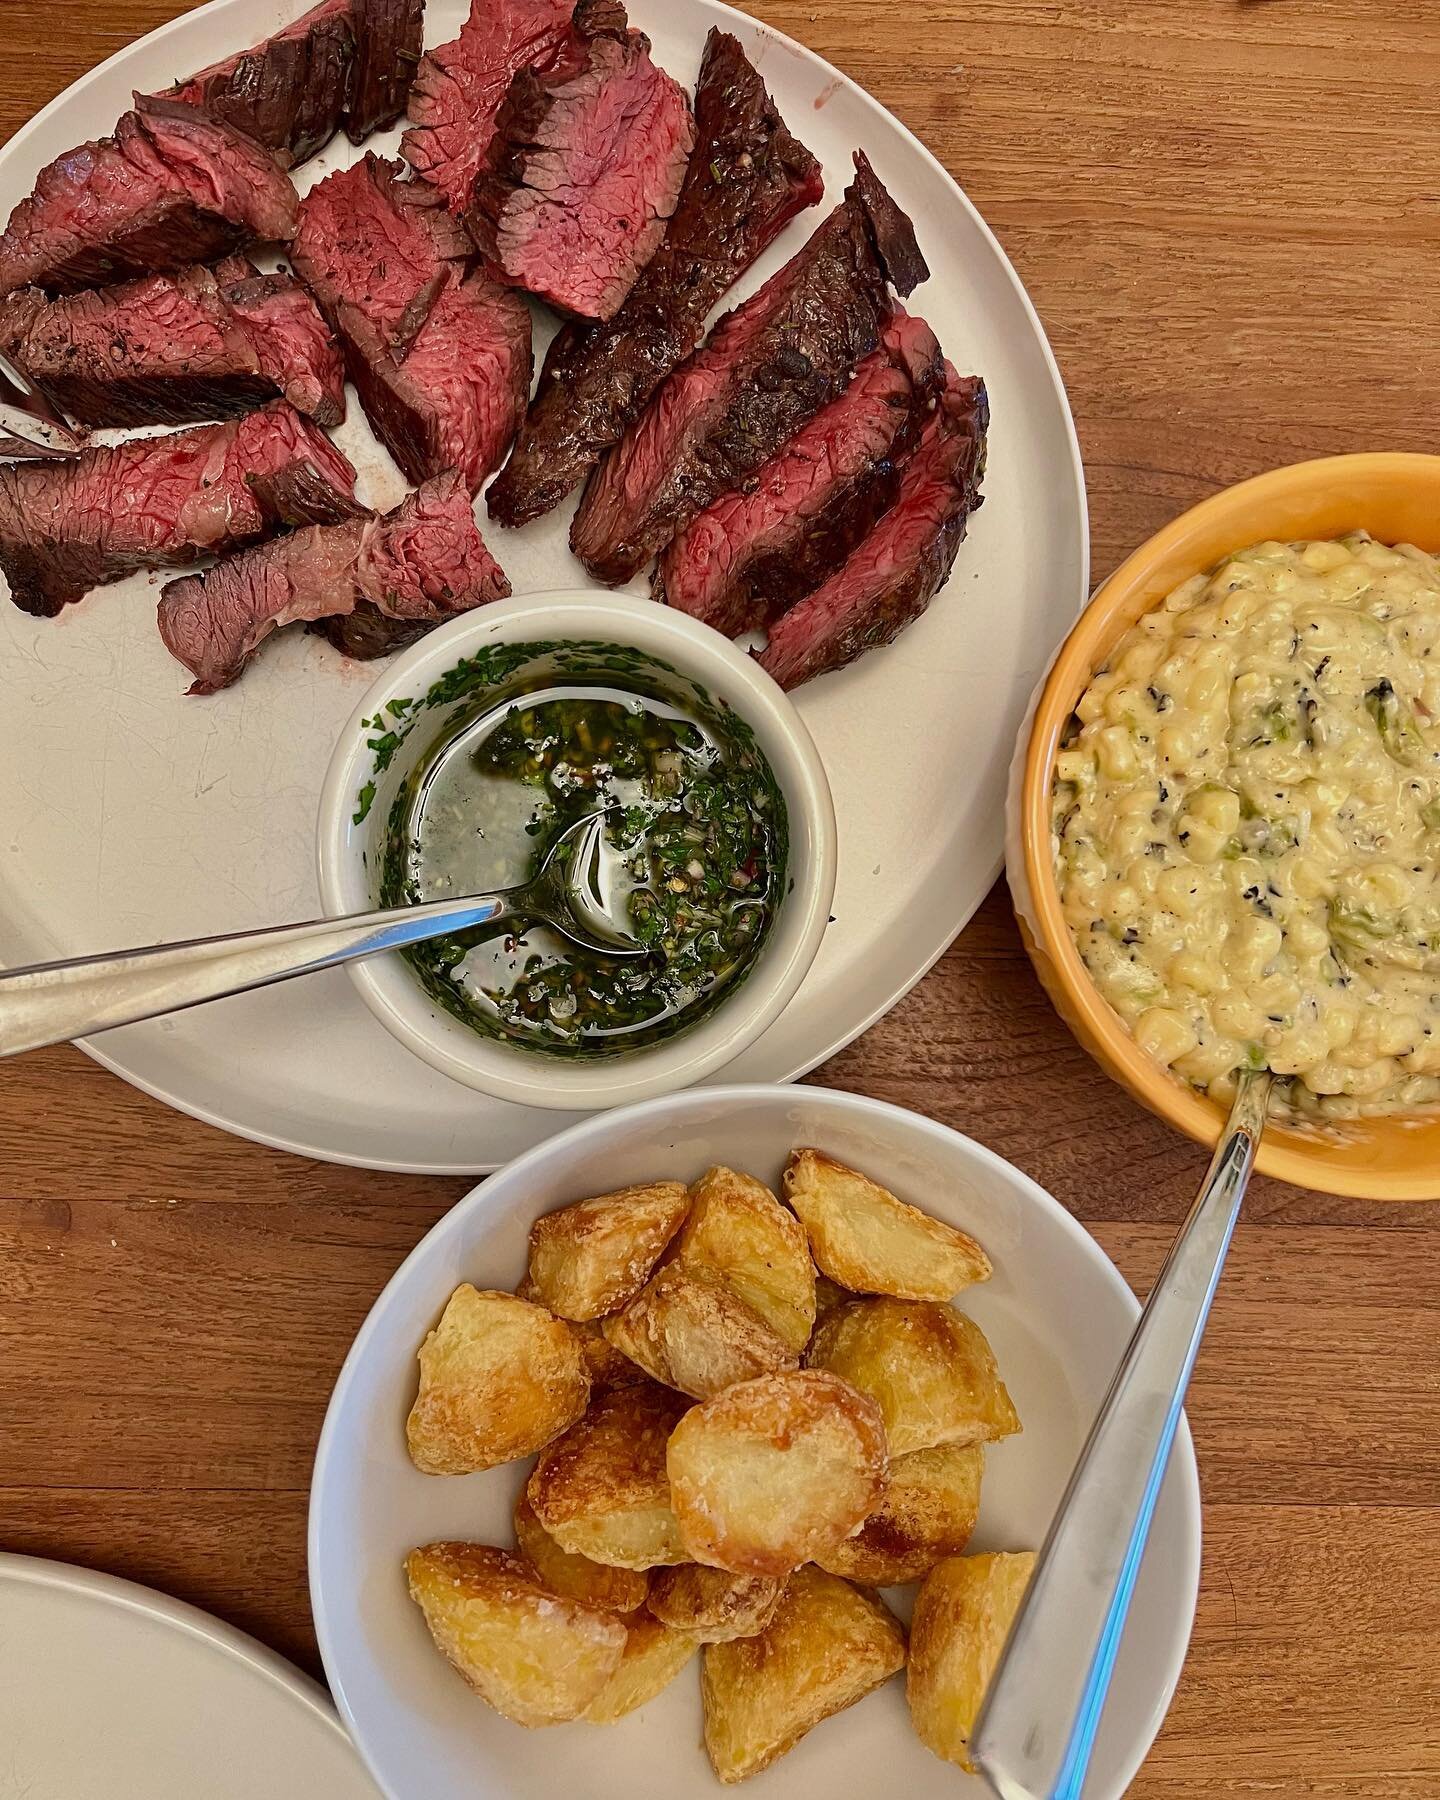 Hanger steak used to be the cut butchers took home for themselves and their families and if you cook it correctly you&rsquo;ll know why. All the steak flavor of a ribeye at half the cost. I made this one with chimichurri, roast beef fat potatoes, and